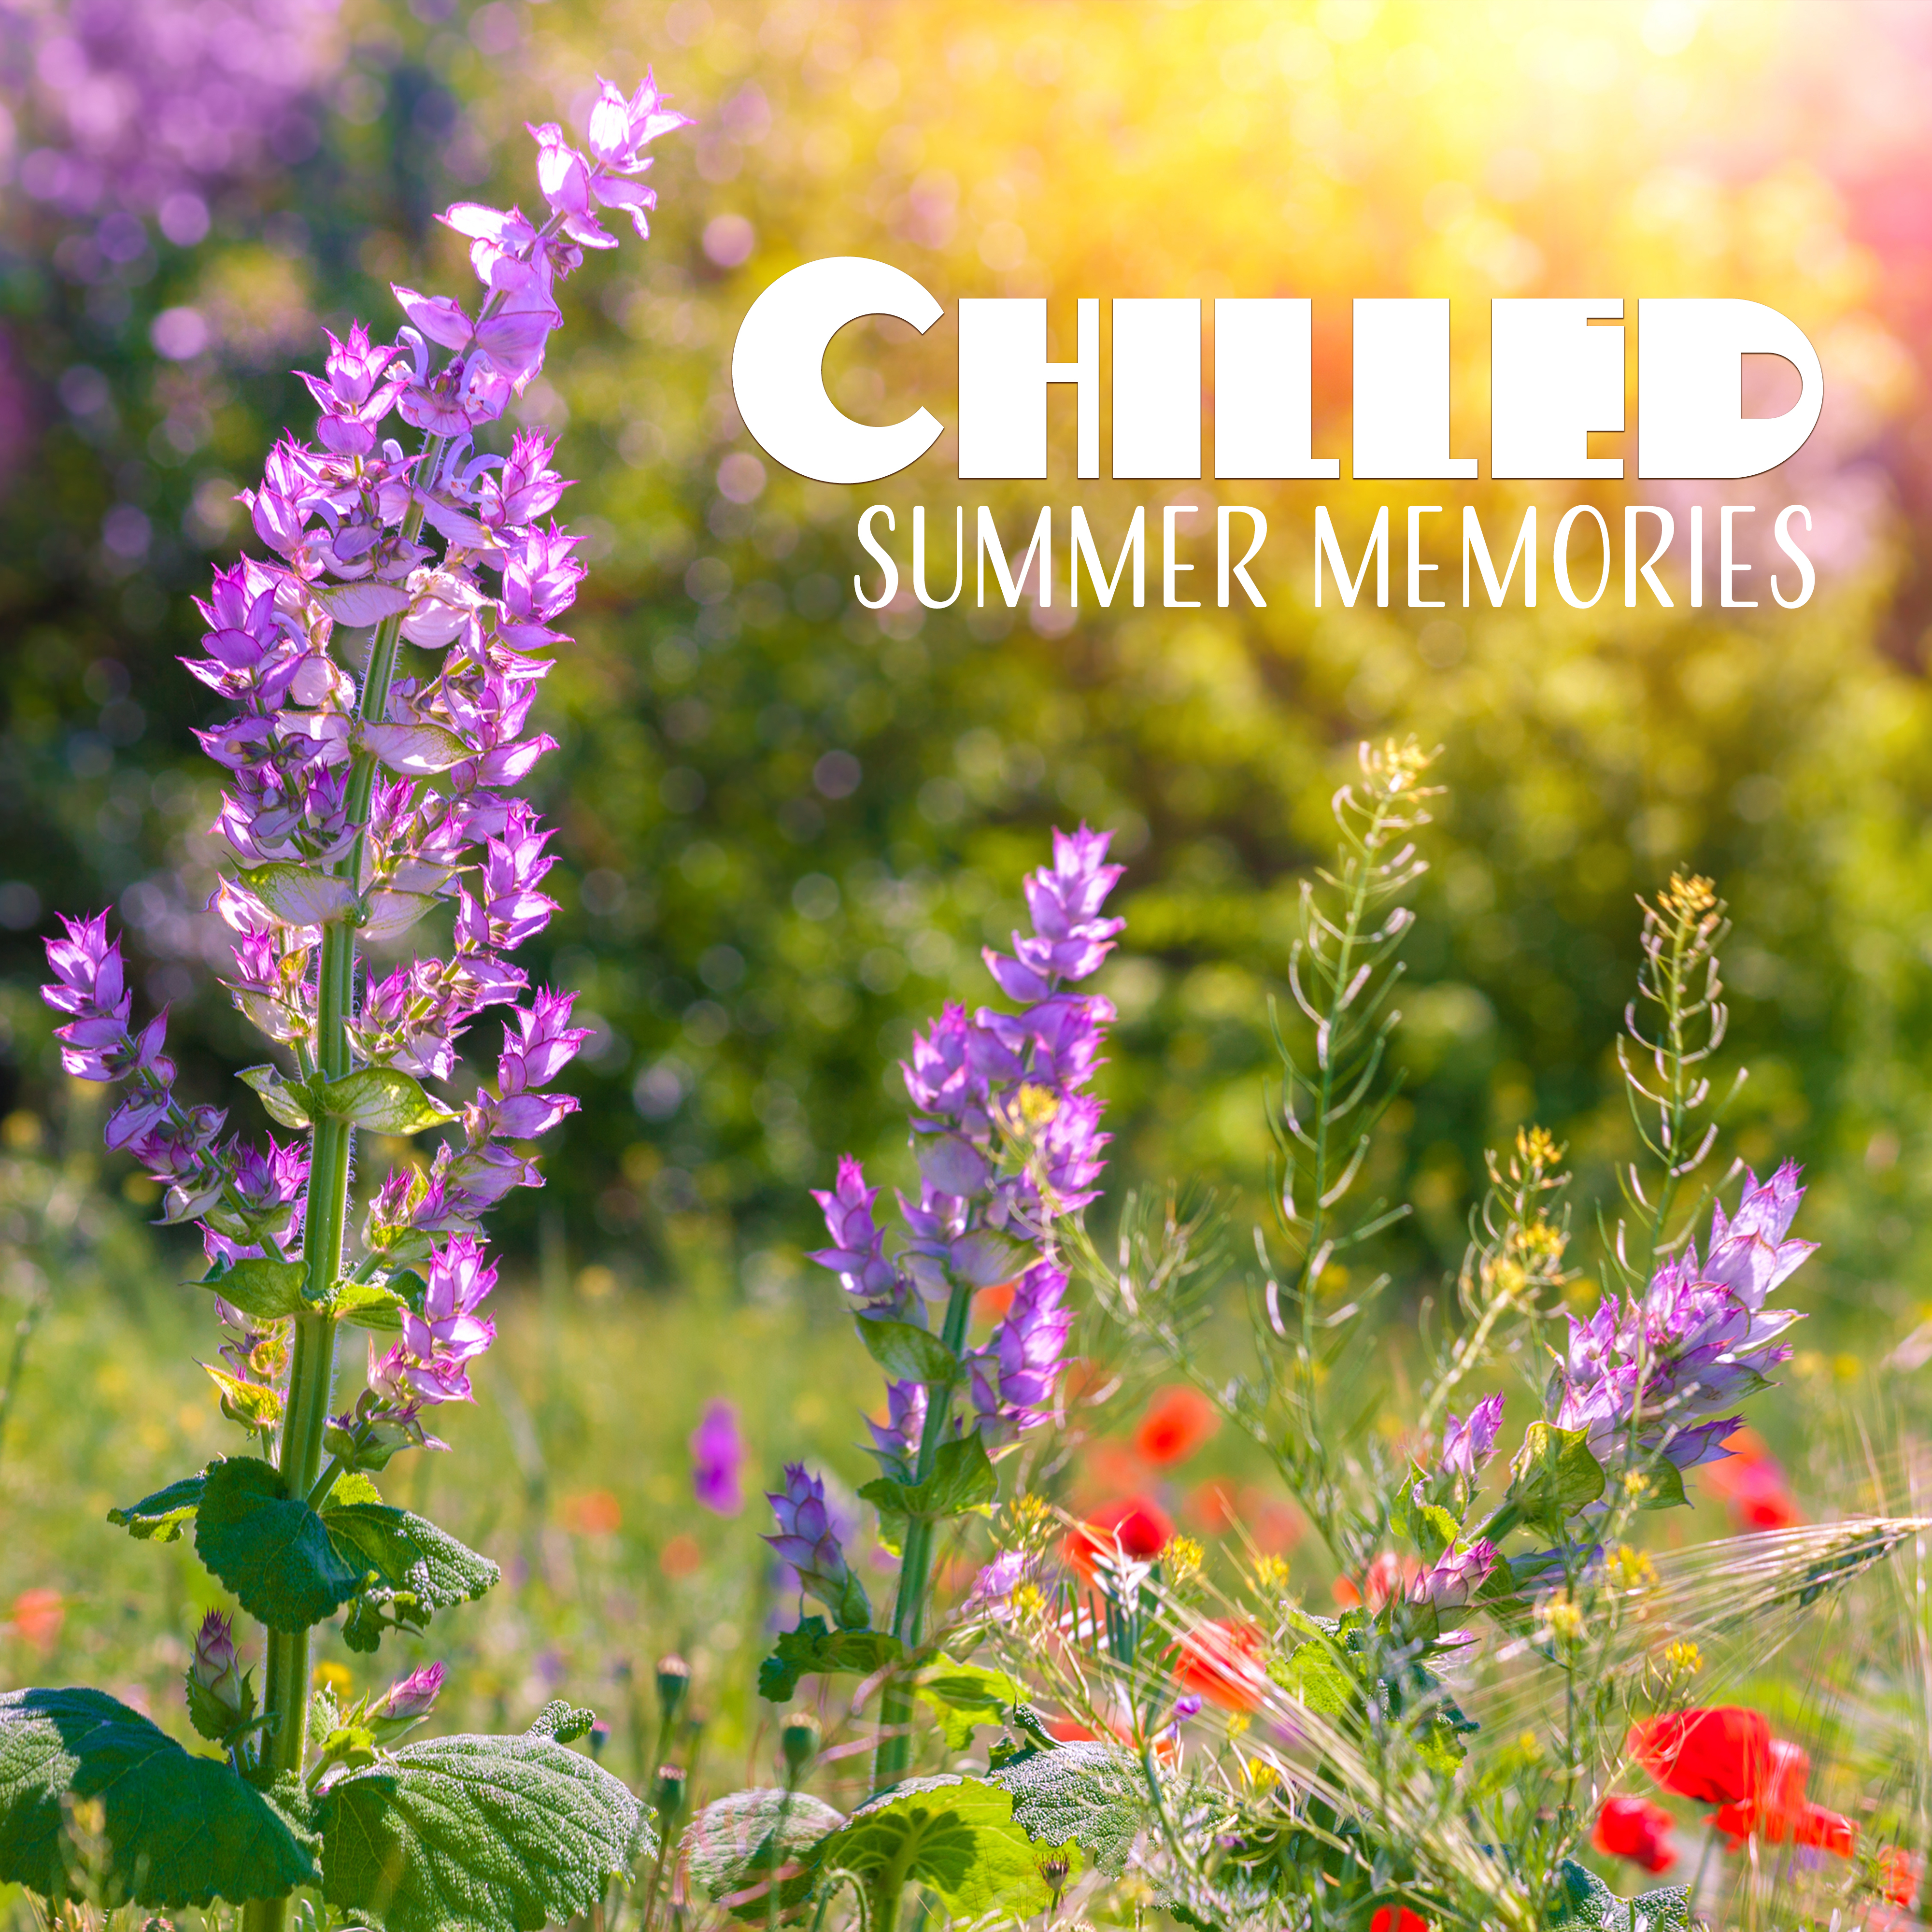 Chilled Summer Memories – Calming Sounds, Waves of Calmness, Chill Out Beats, Beach Lounge